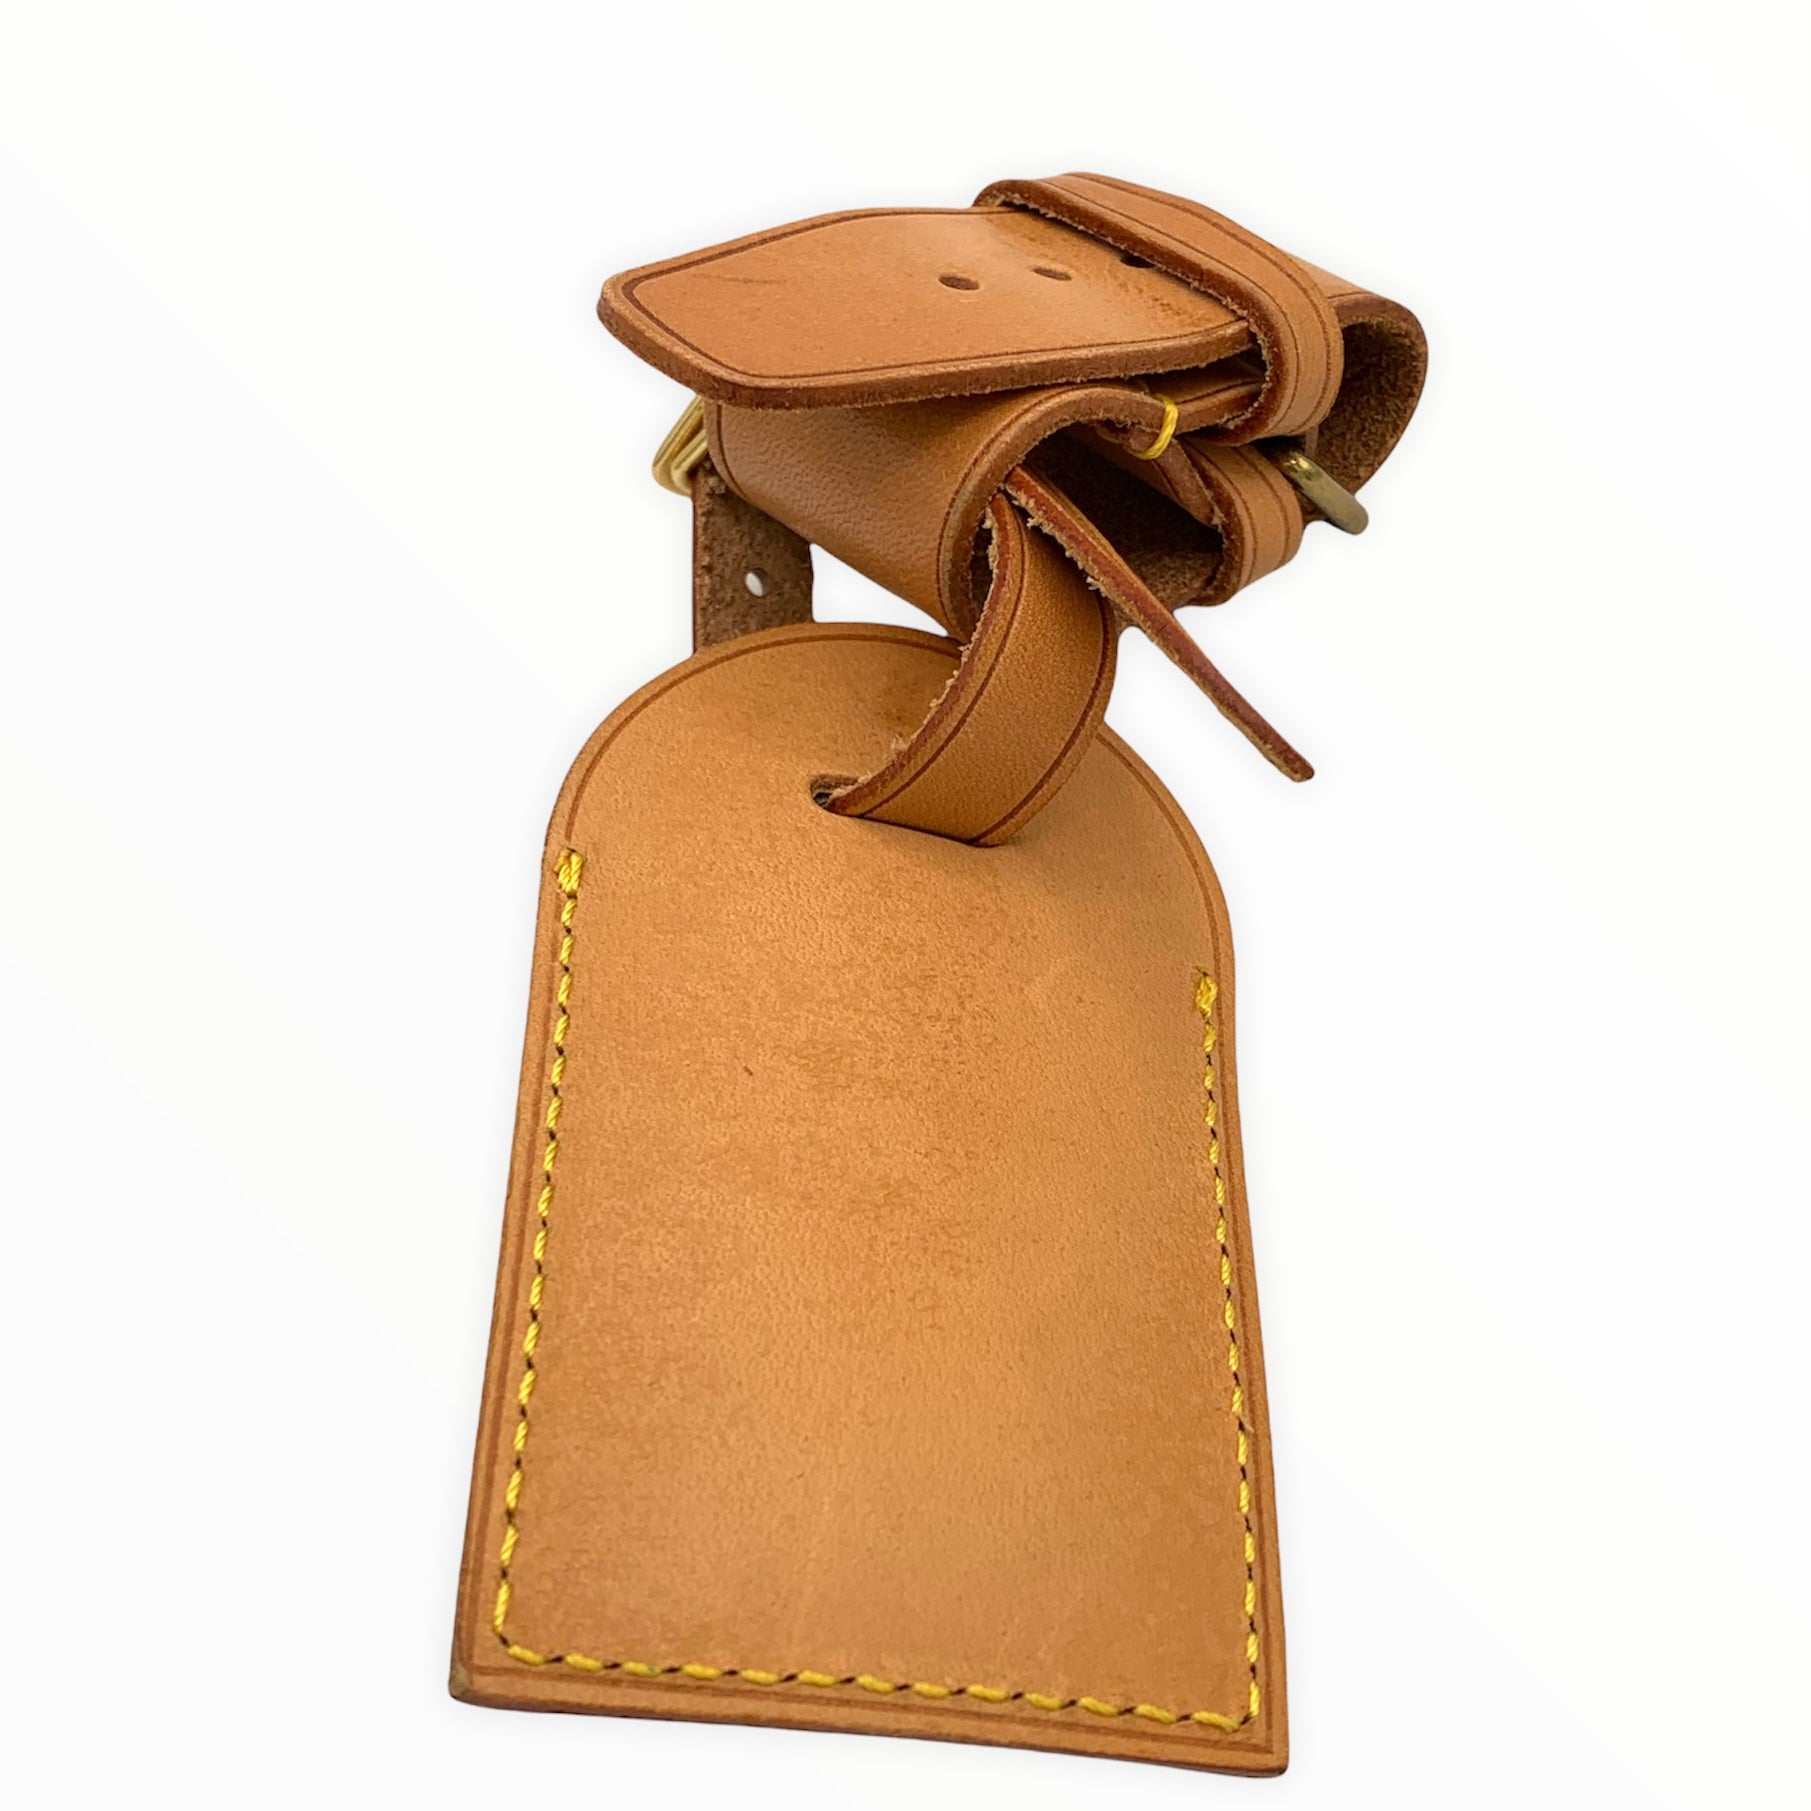 Louis Vuitton Natural Vachetta Luggage Tag and Poignet Set 2LV96a –  Bagriculture